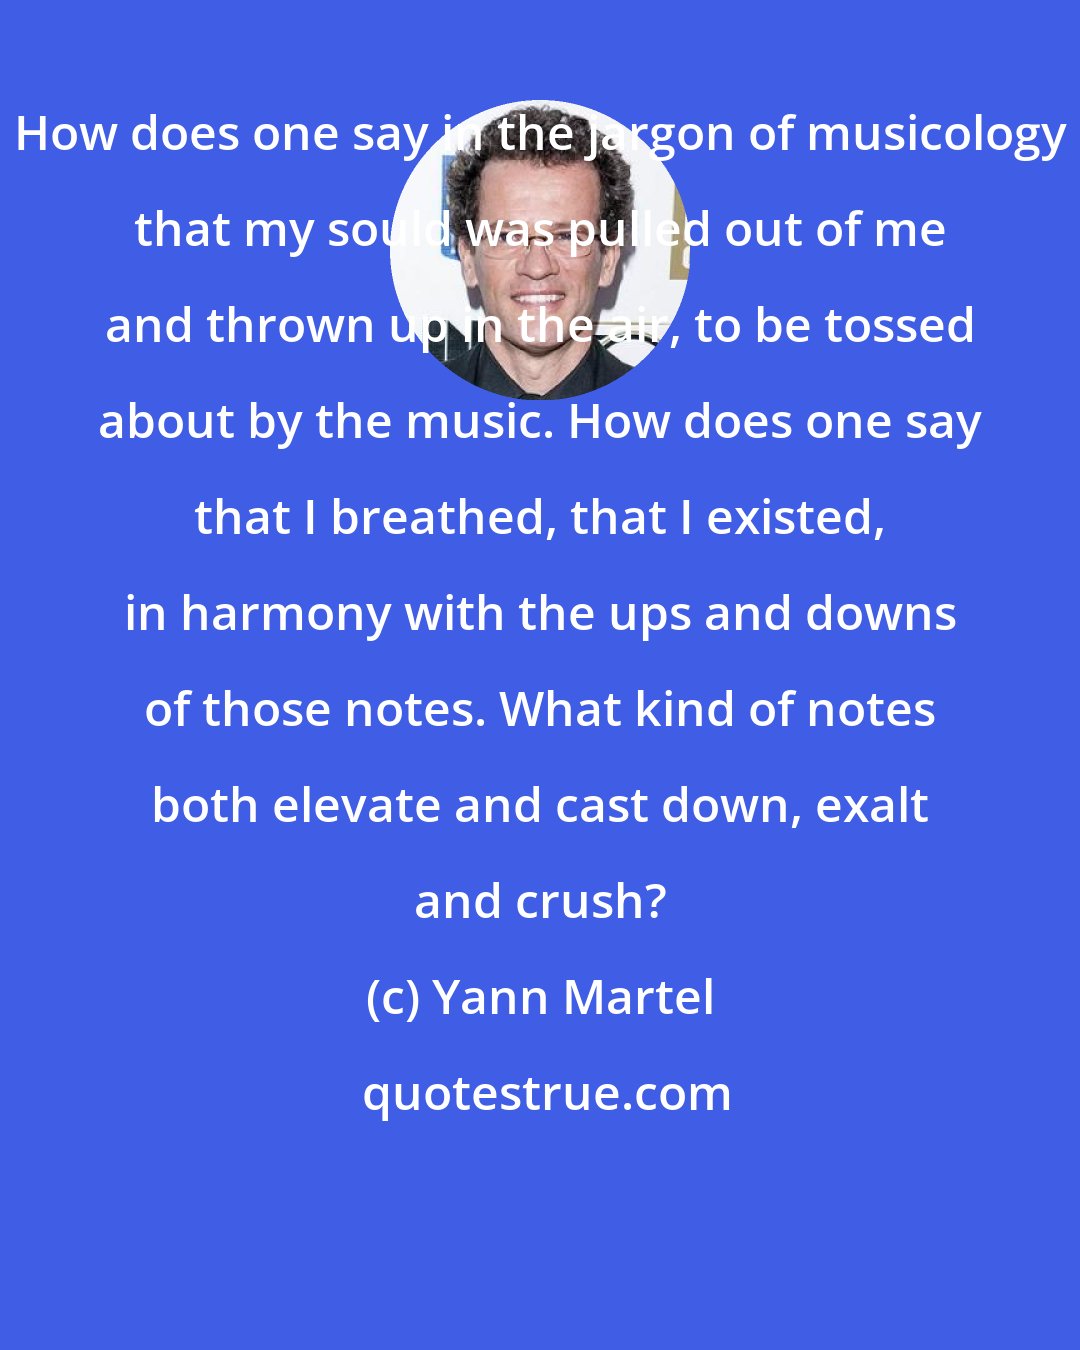 Yann Martel: How does one say in the jargon of musicology that my sould was pulled out of me and thrown up in the air, to be tossed about by the music. How does one say that I breathed, that I existed, in harmony with the ups and downs of those notes. What kind of notes both elevate and cast down, exalt and crush?